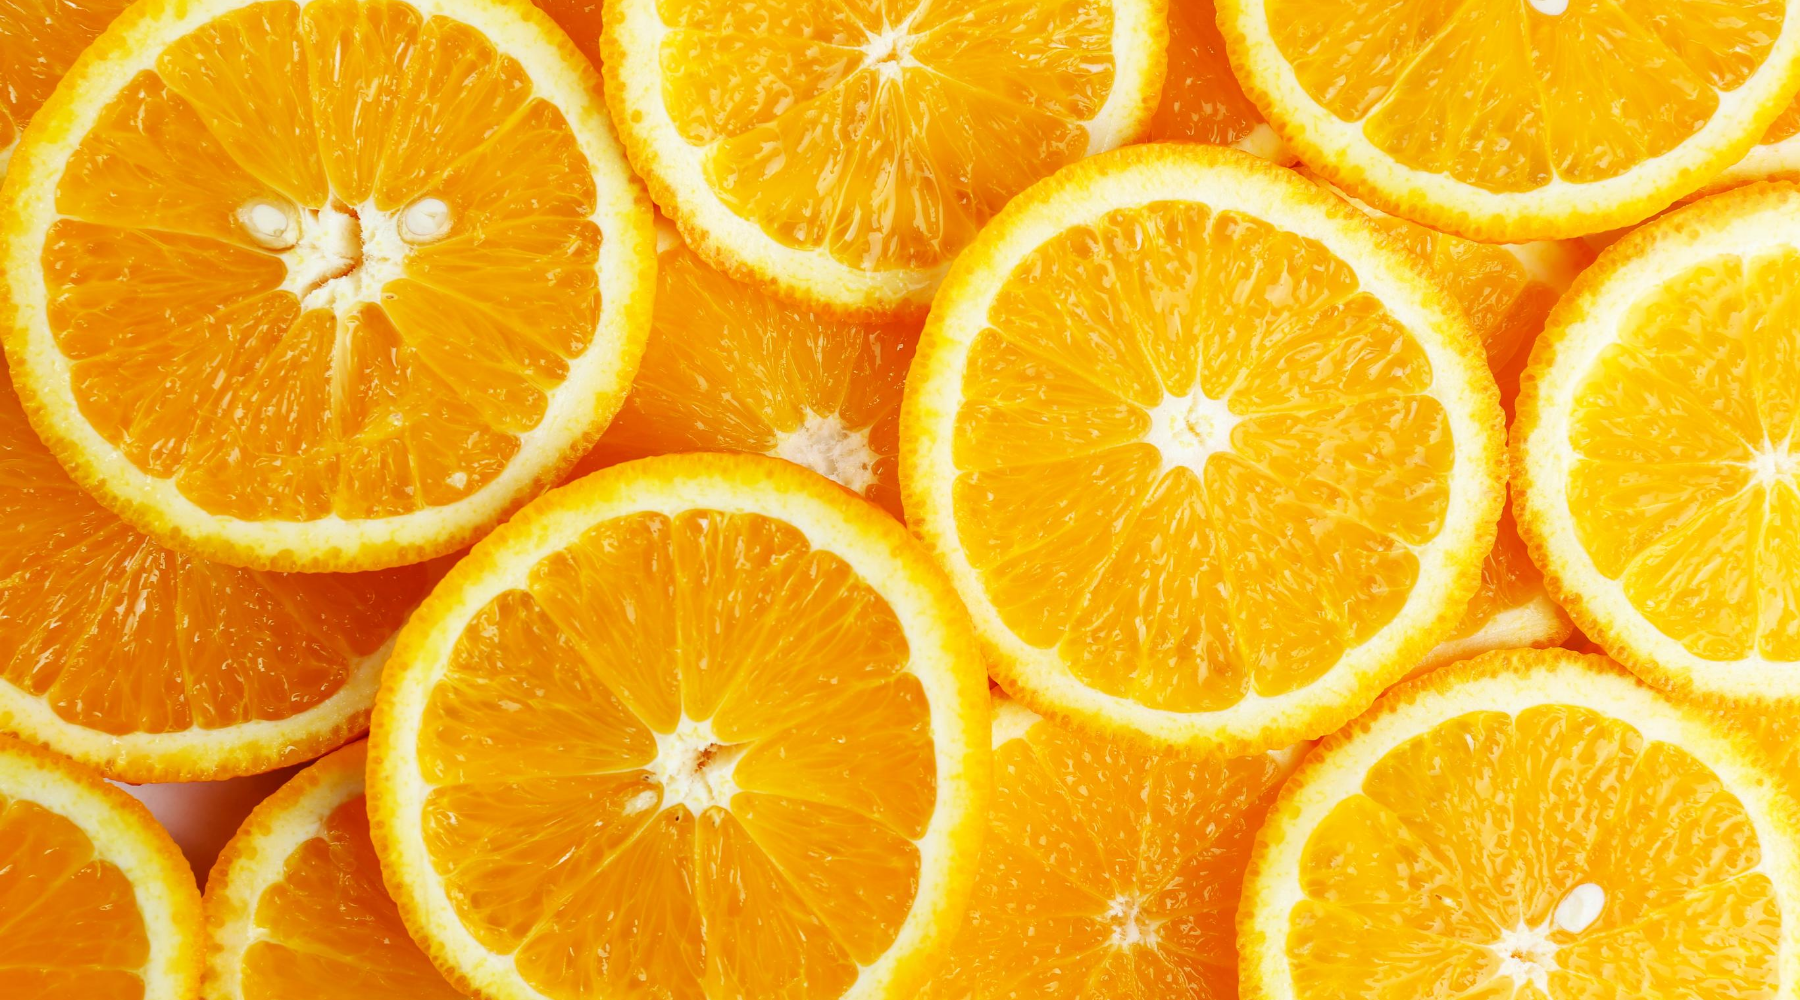 Most people think of ascorbic acids, a.k.a. vitamin C, as a powerful immune booster. But vitamin C benefits include cardiovascular and nerve function support, skin and eye health and much more.